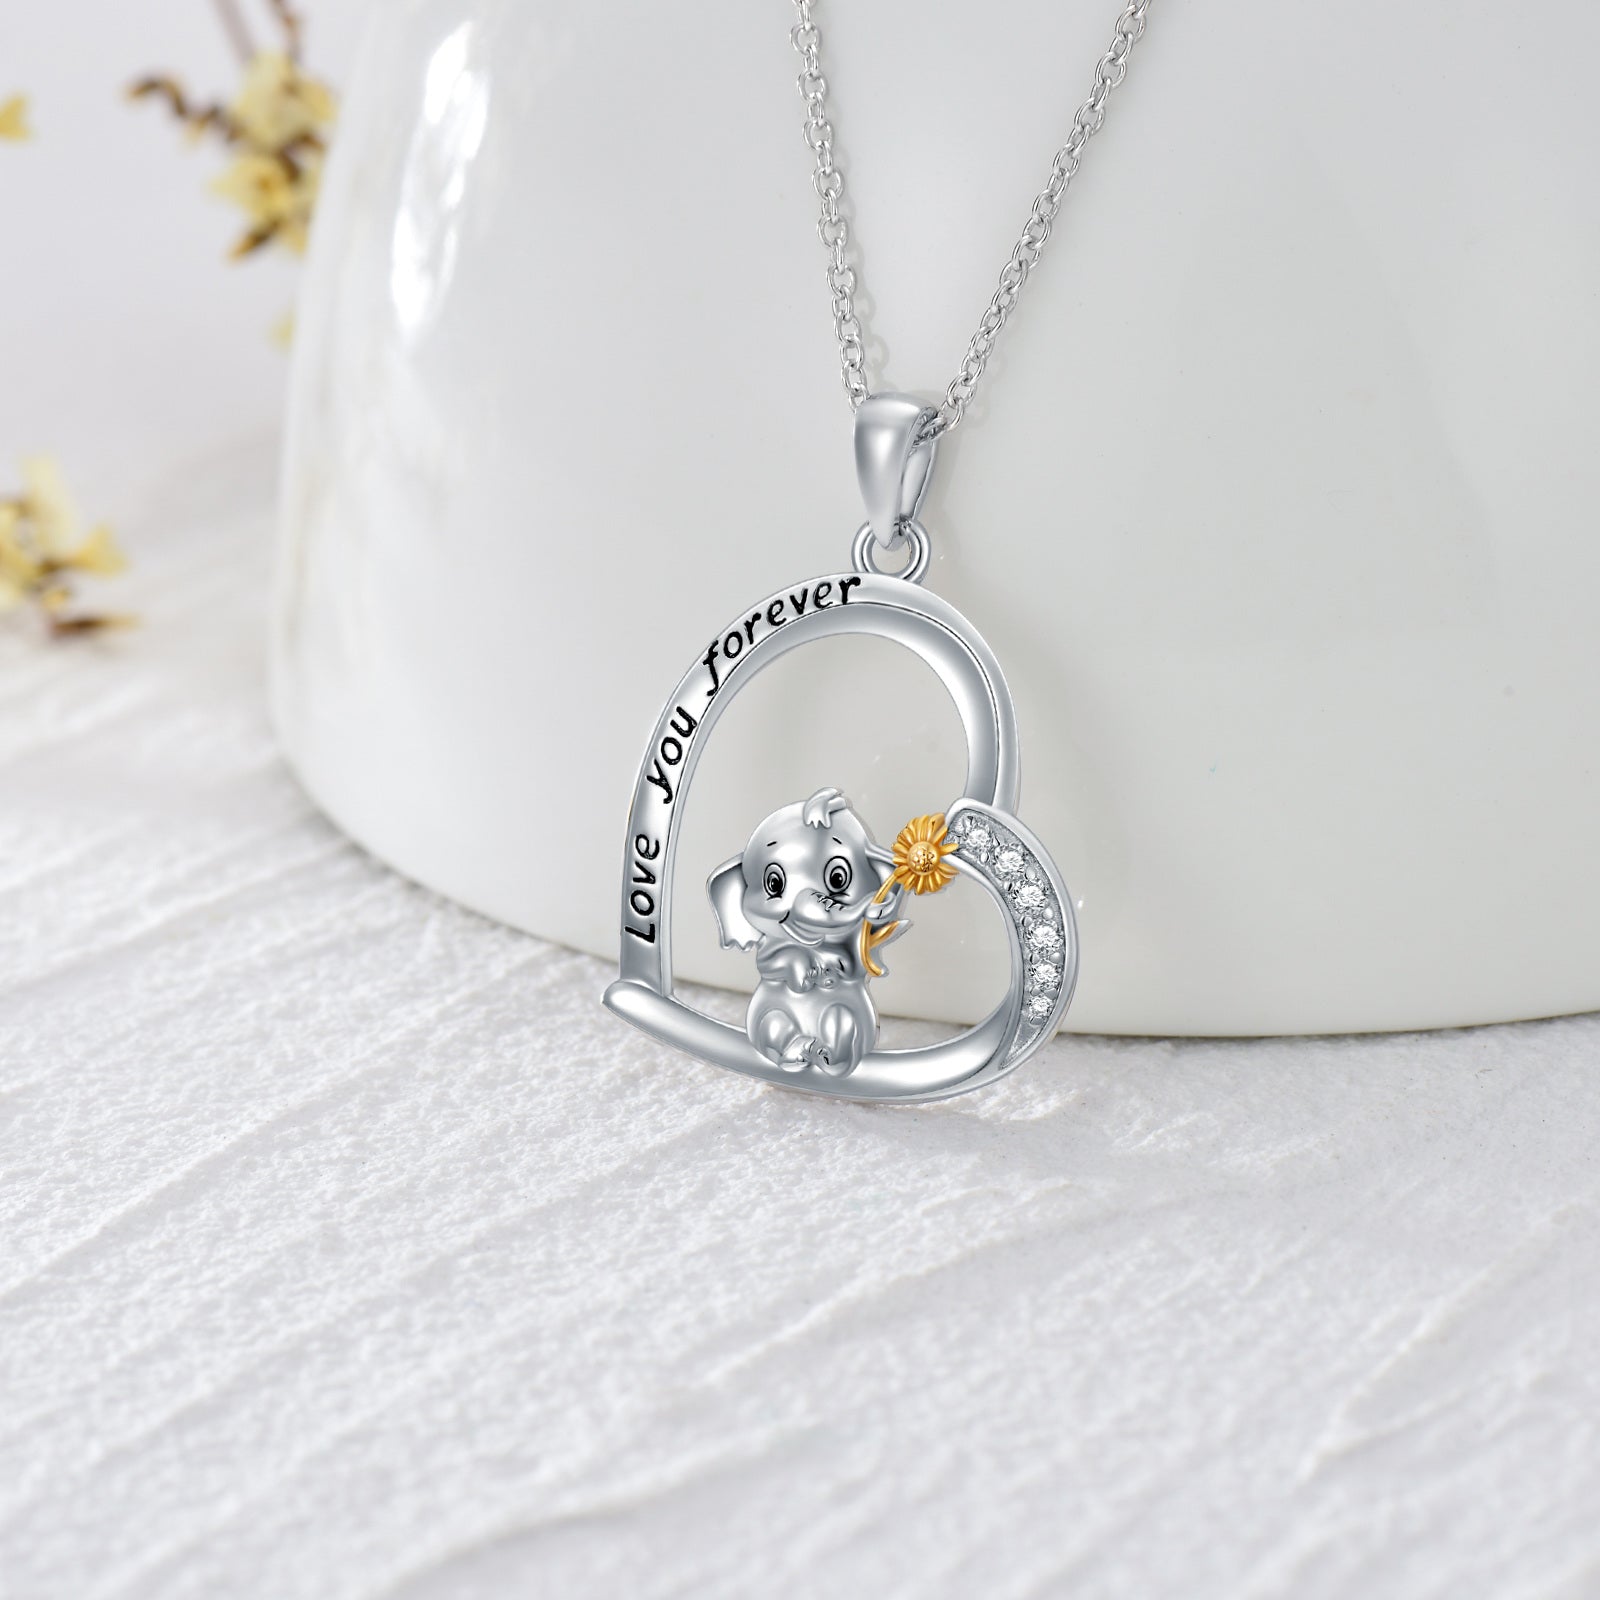 A Maramalive™ Elephant Necklace 925 Sterling Silver Love You forever Elephant Sunflower Pendant Jewelry Gifts for Women Girls with the words love you forever.